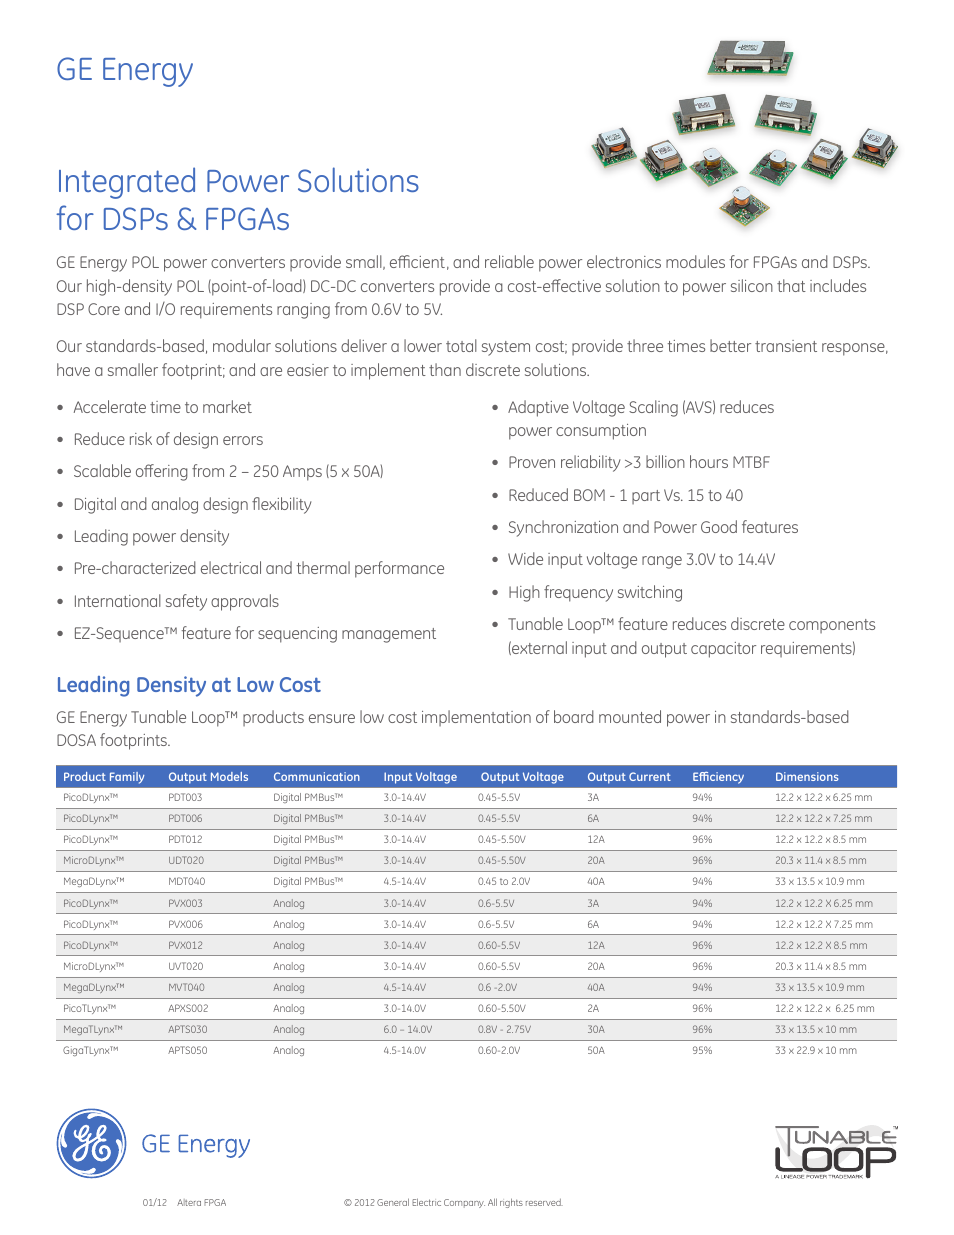 Integrated Power Solutions for DSPs & FPGAs